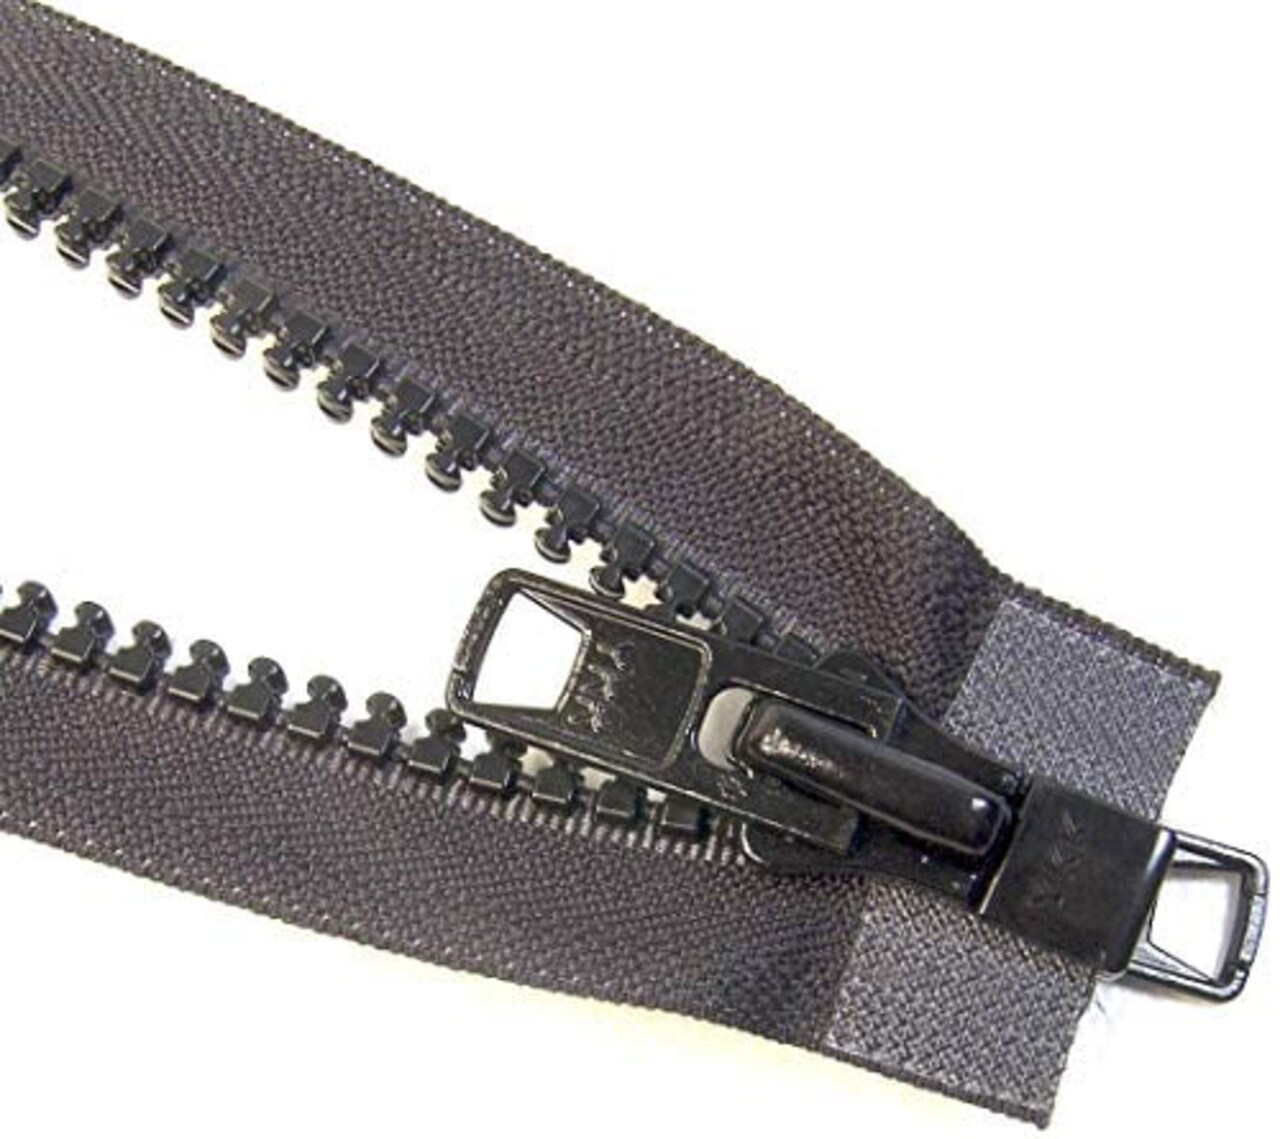 10 Heavy Duty Marine Grade YKK Separating Zipper - Metal Tab Slider - Color  Black - Made in The United States (1 Zipper Per Pack) (108 Inches)